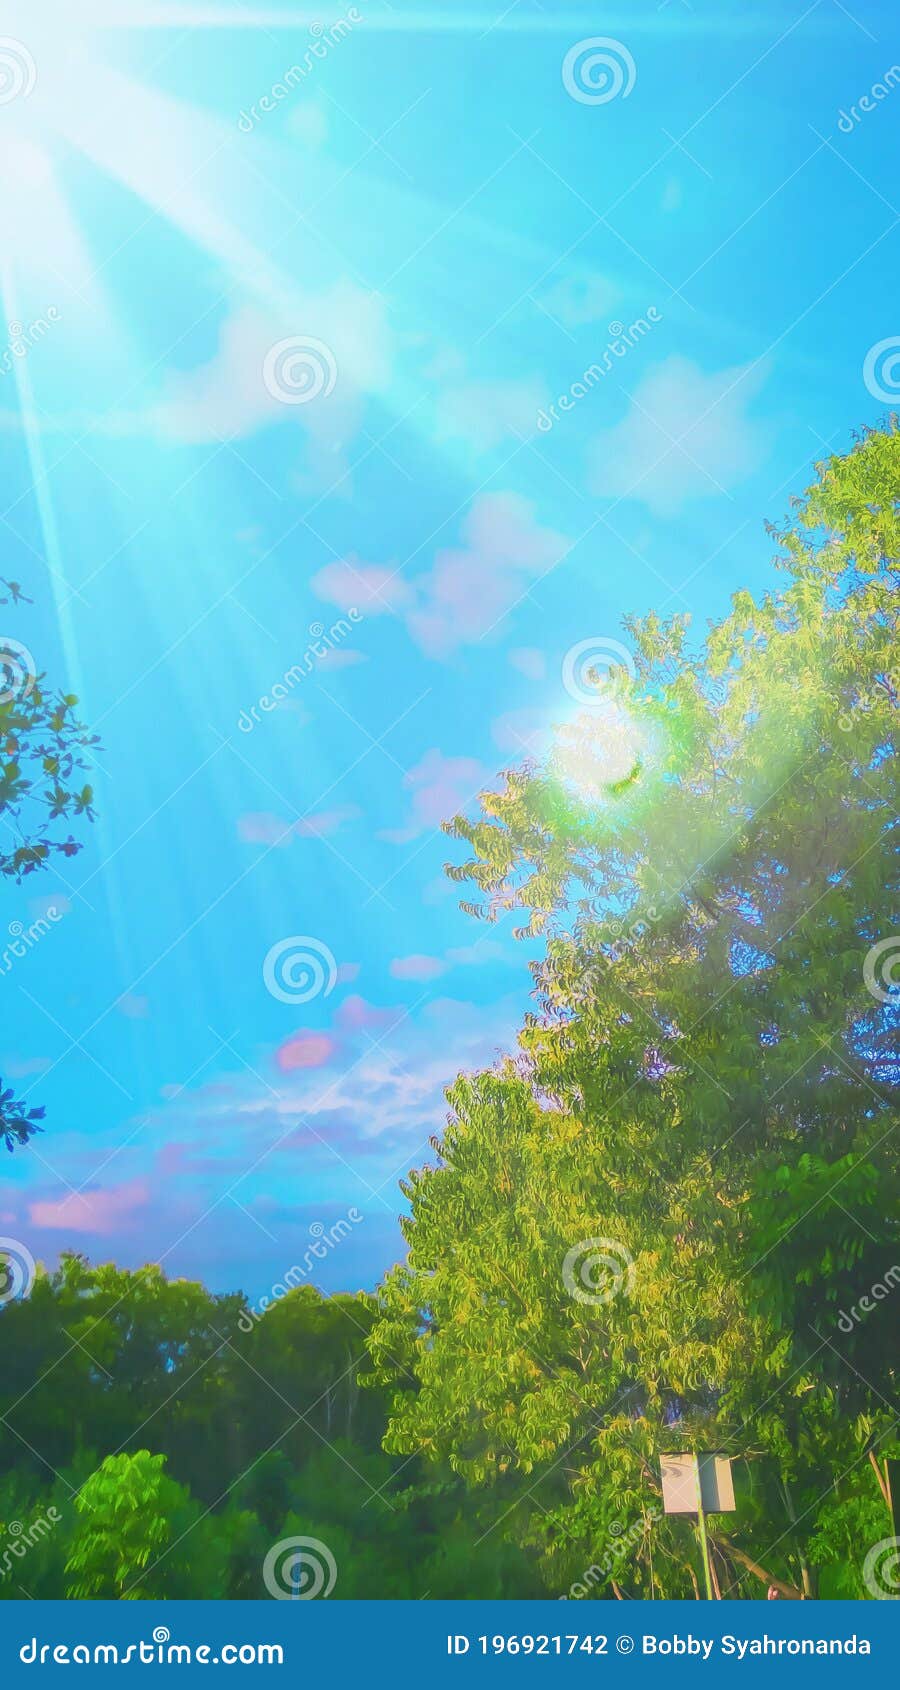 Summer Background in Cartoon or Anime Style Art Stock Photo - Image of  landscape, natural: 196921742